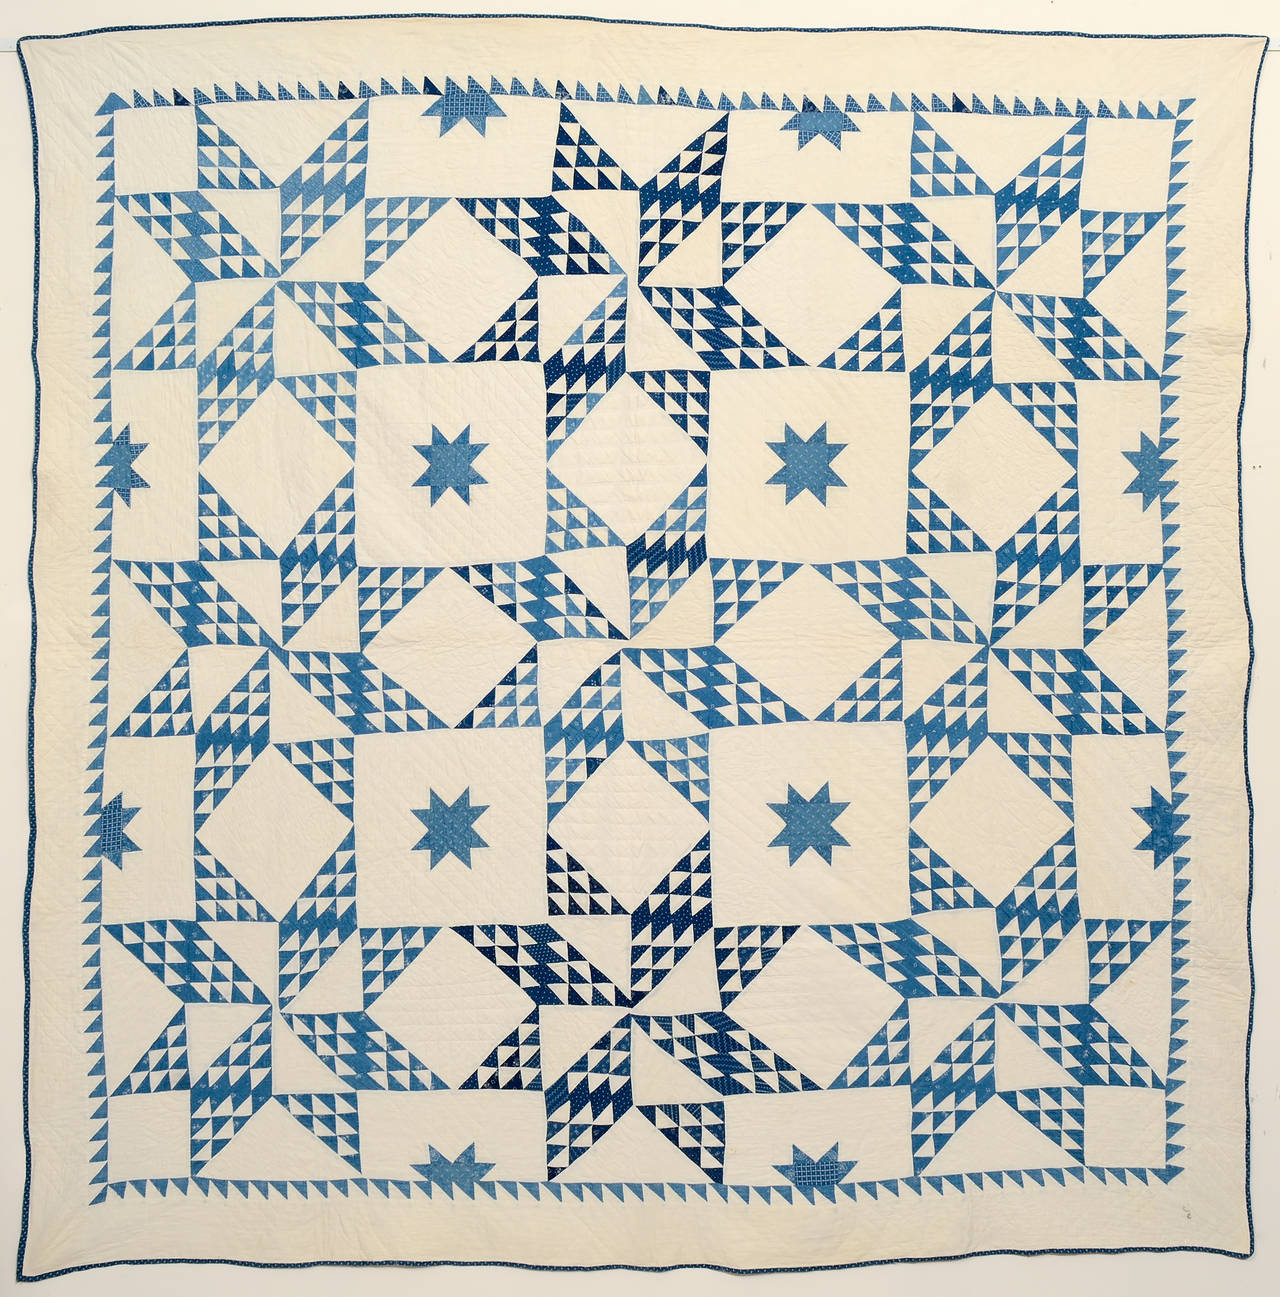 This version of touching stars is different from the more usual configuration of stars made of diamonds. In this quilt known as 